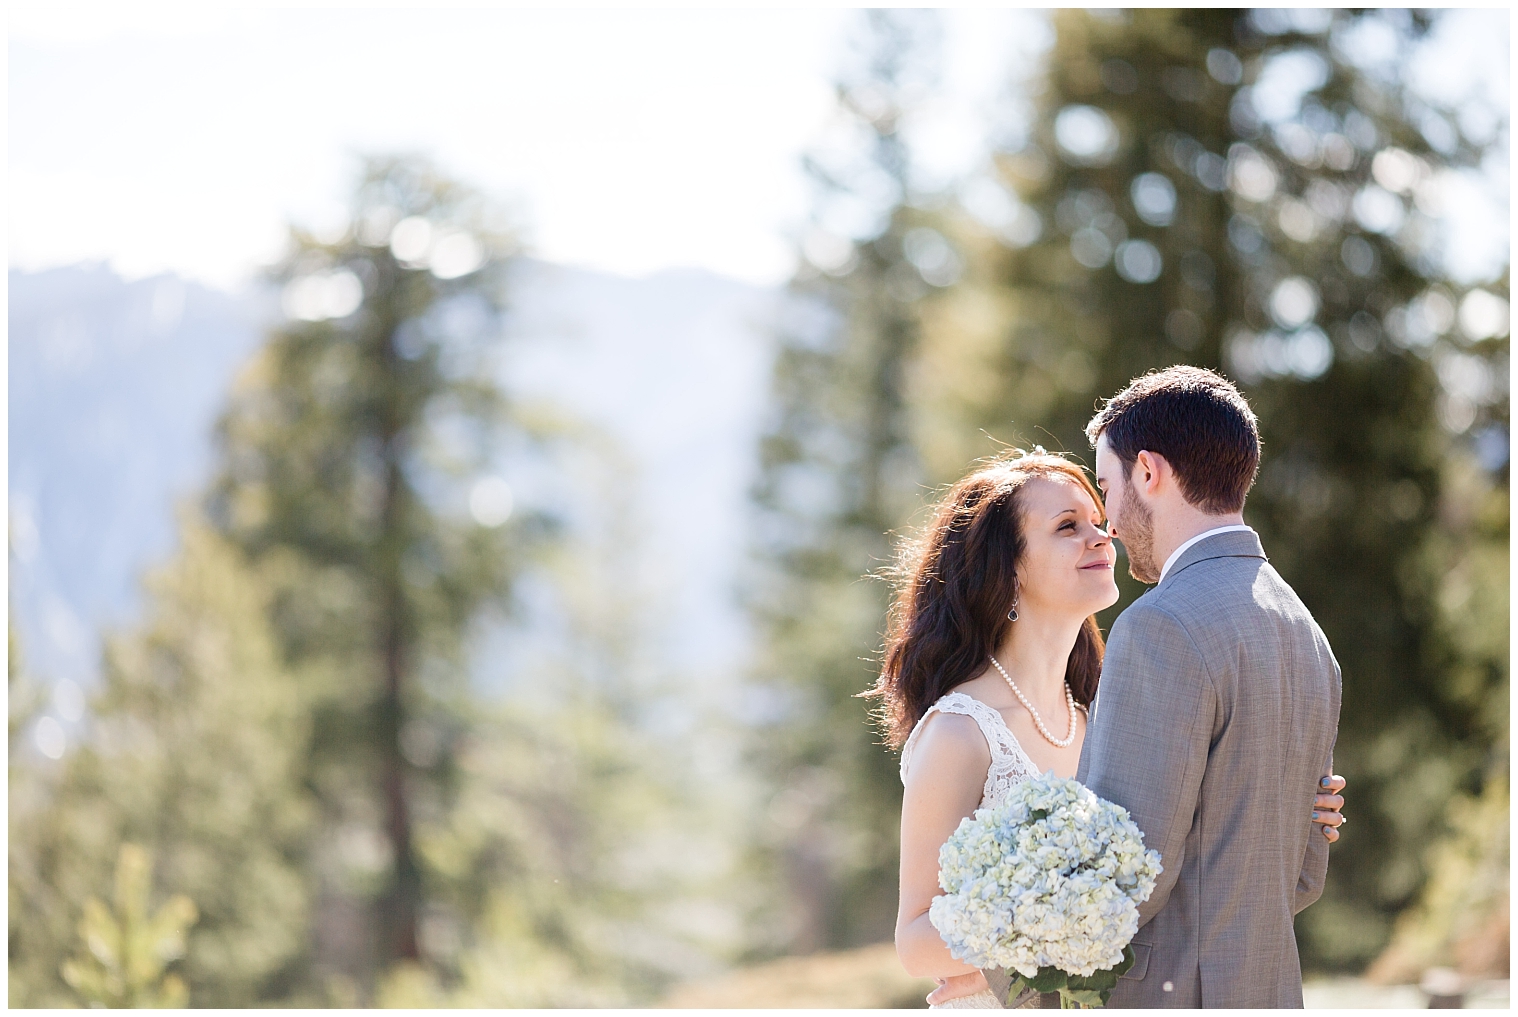 The wedding couple lean in for a kiss at their Colorado mountain elopement.